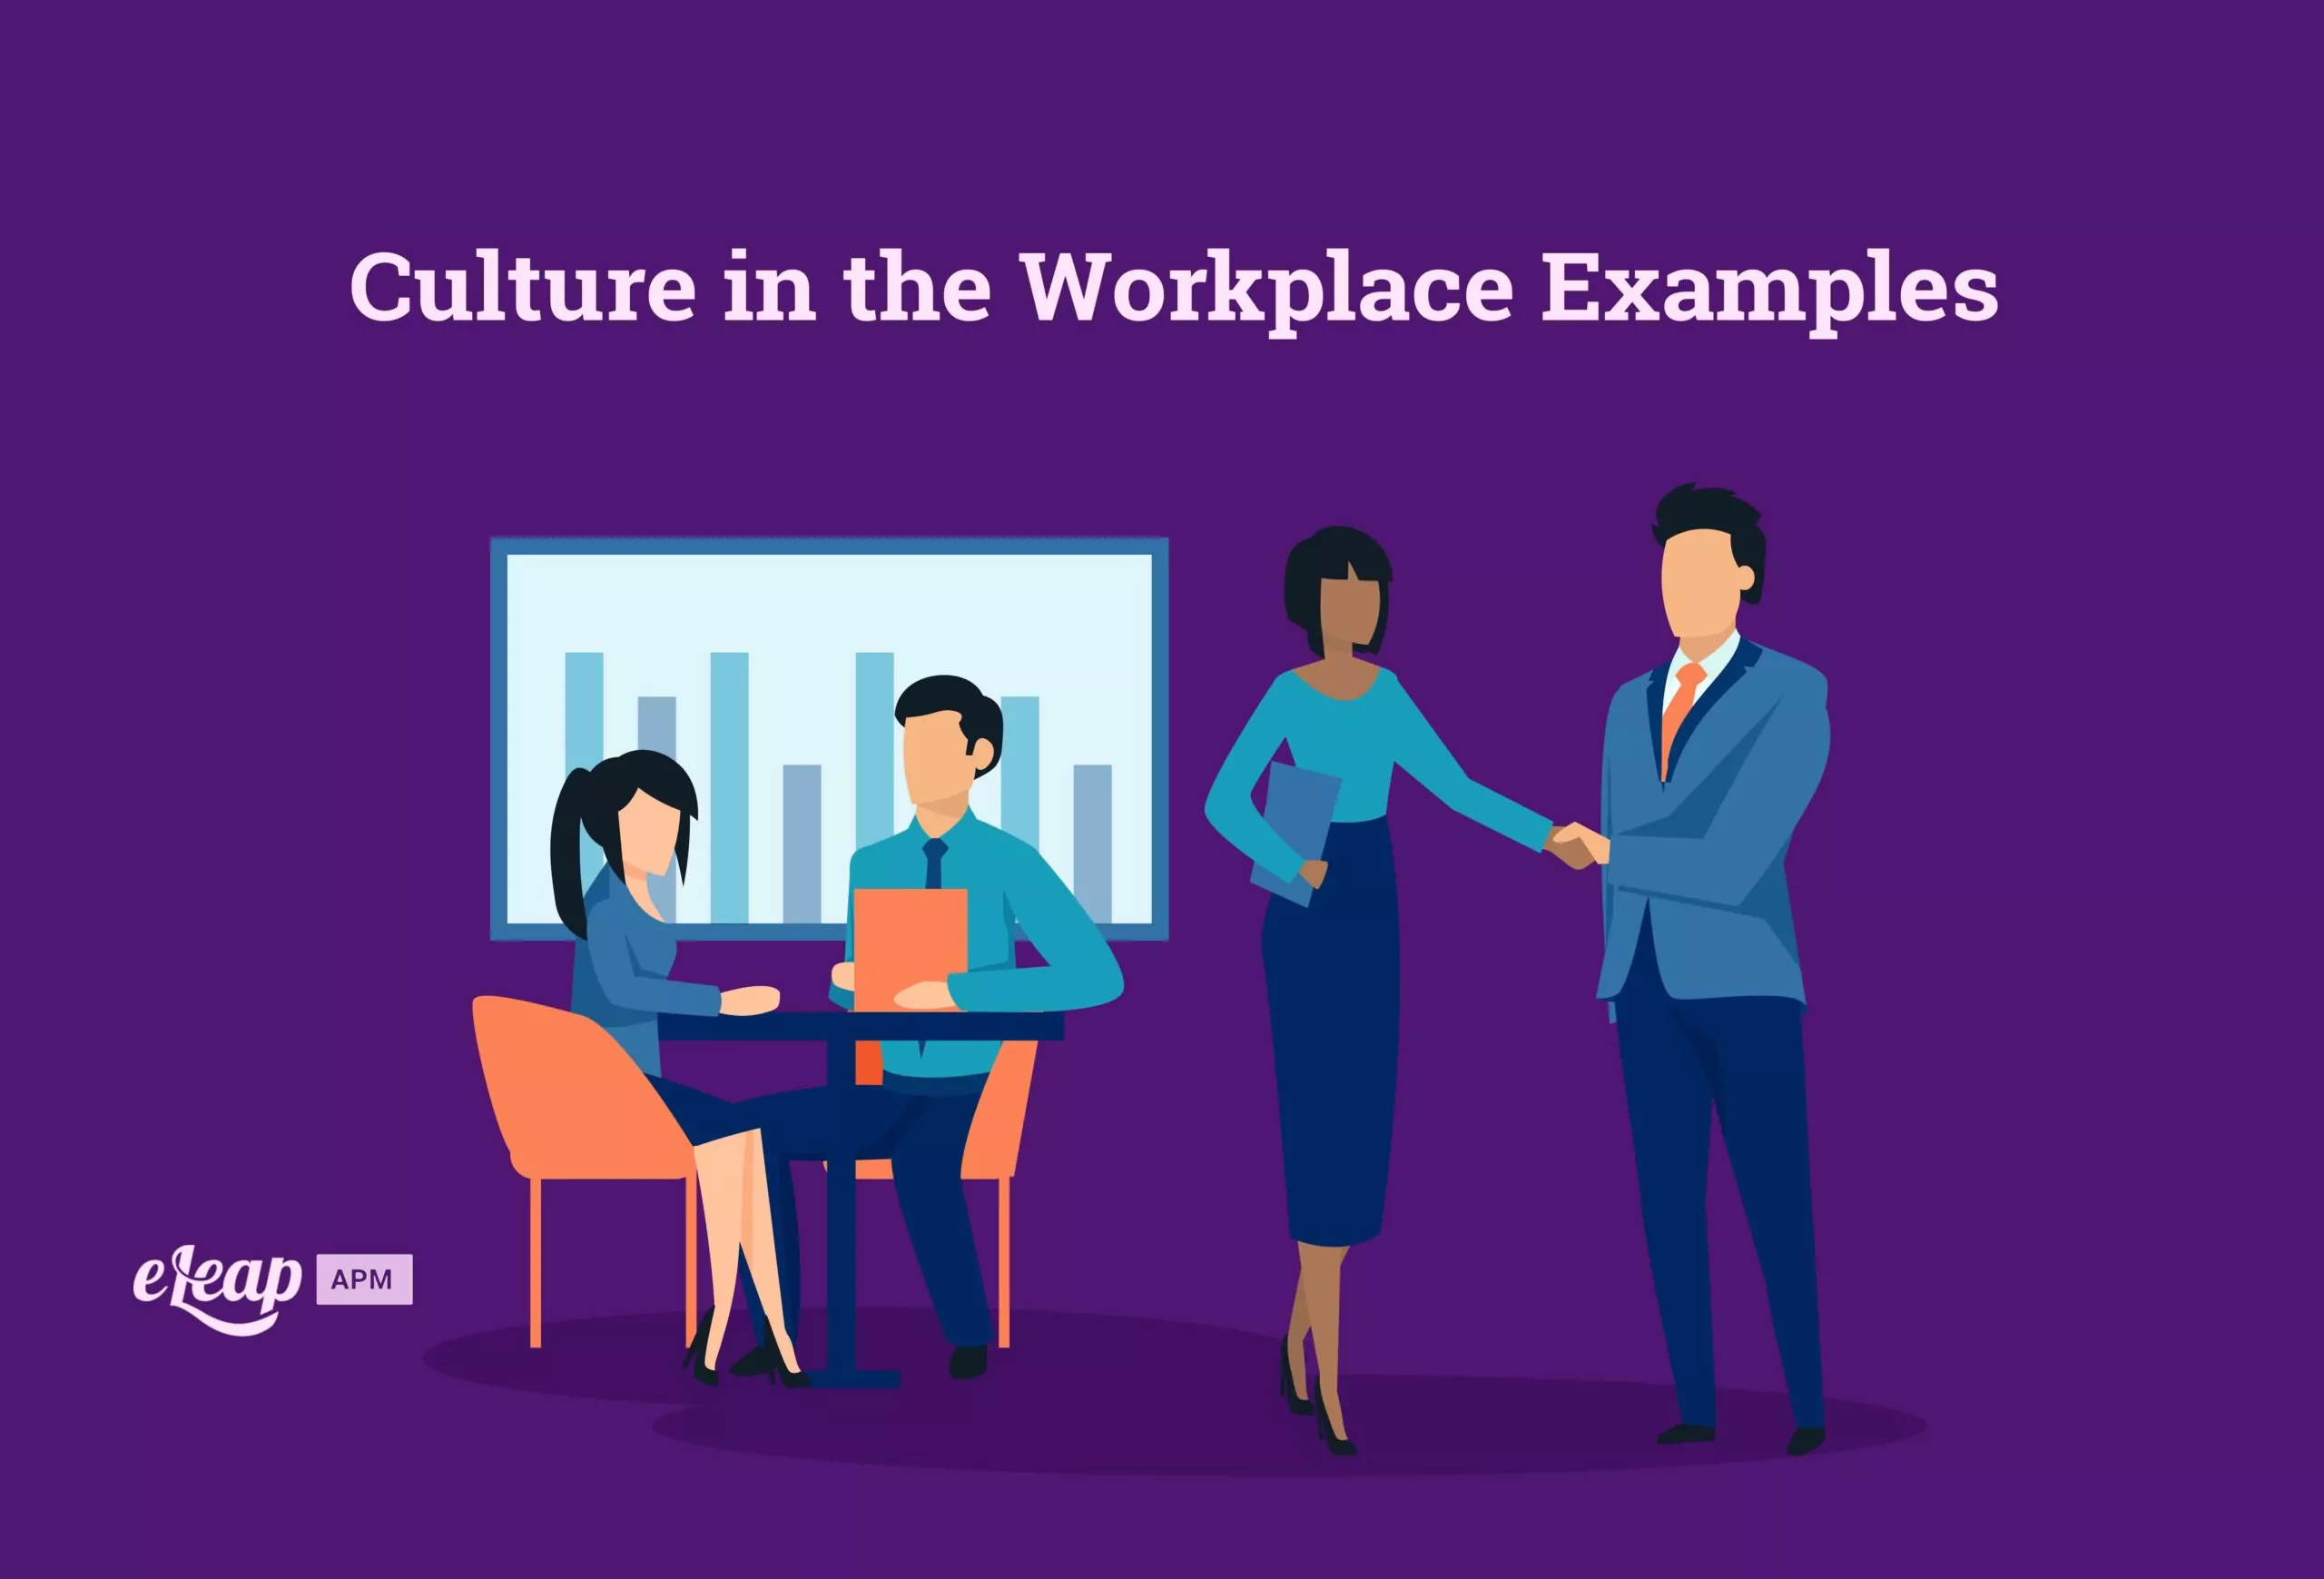 Culture in the Workplace Examples